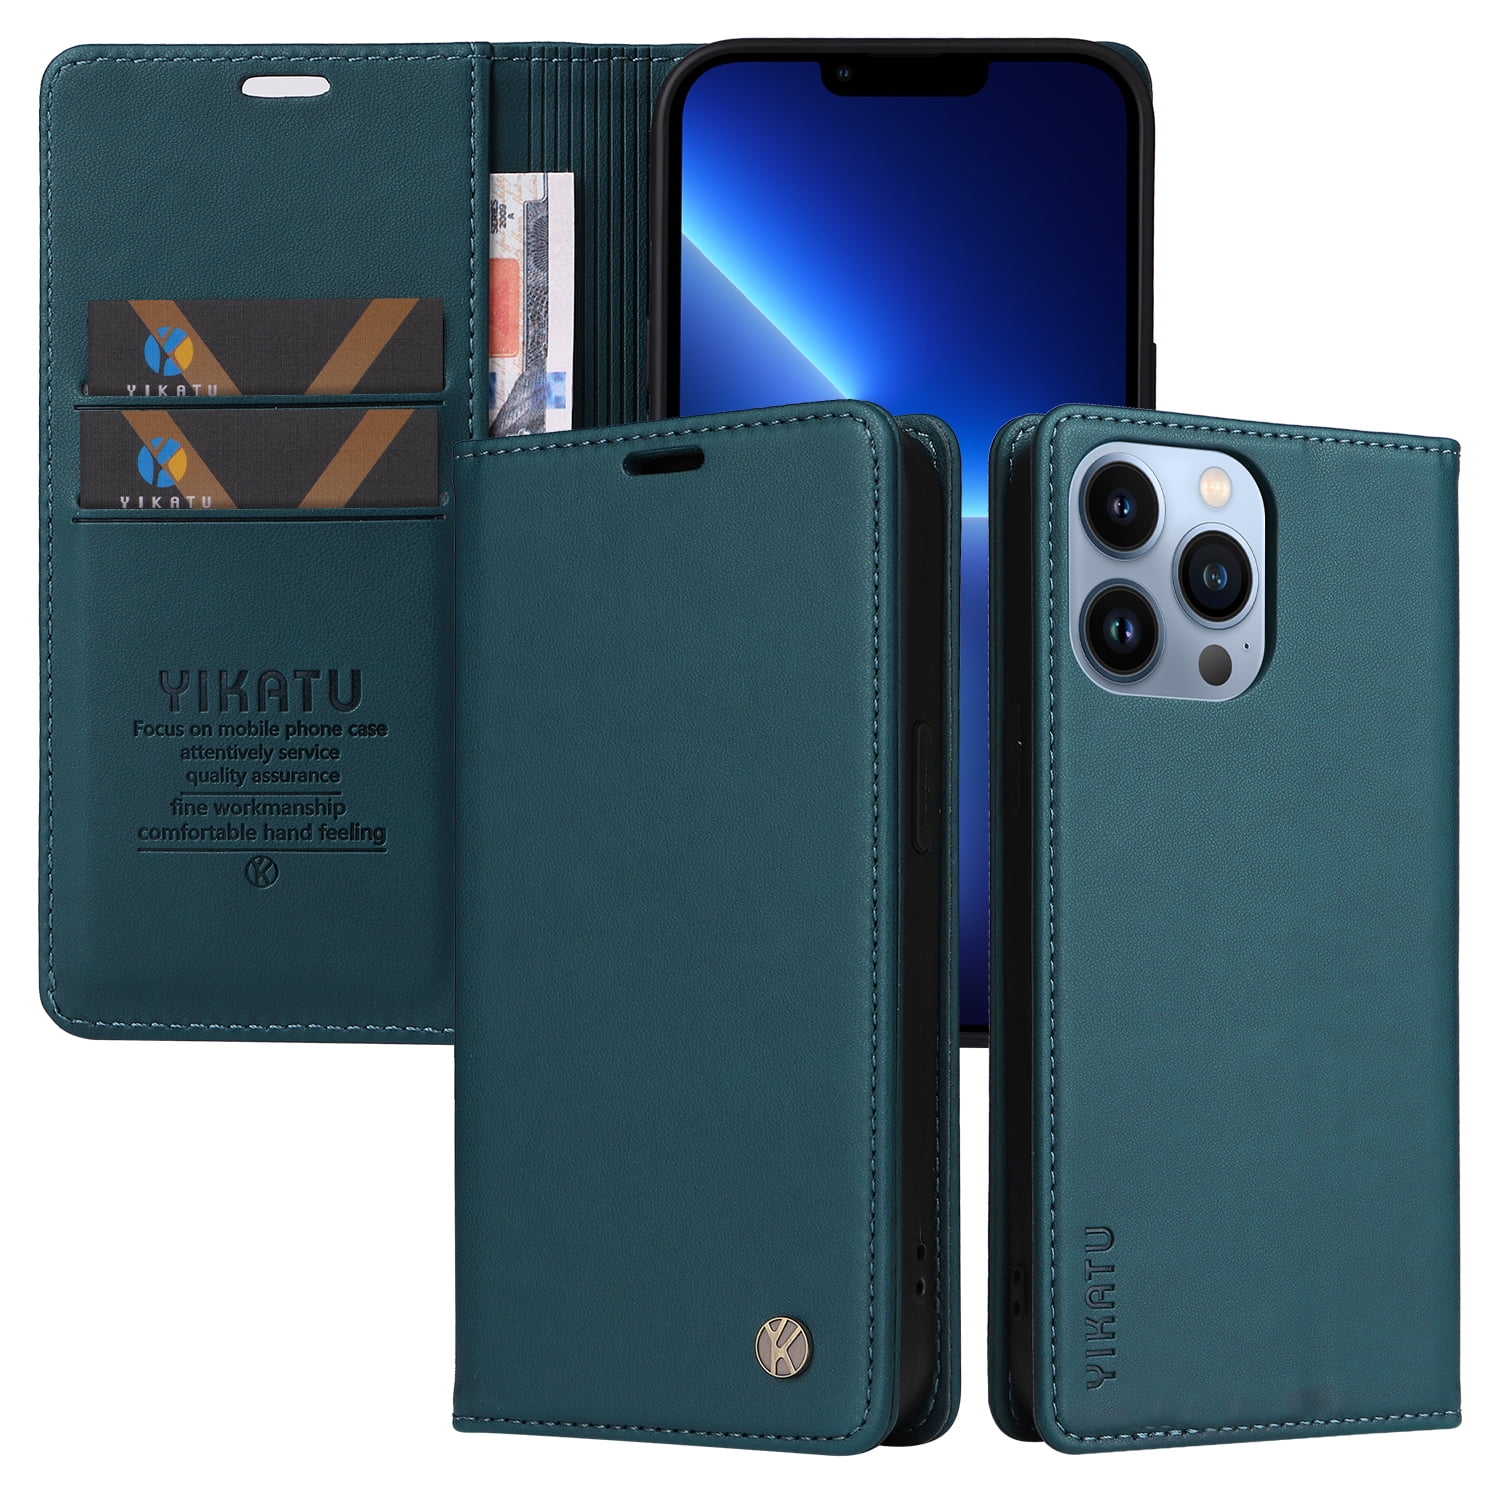 Allytech Case for iPhone X/iPhone XS, Premium PU Leather Wallet